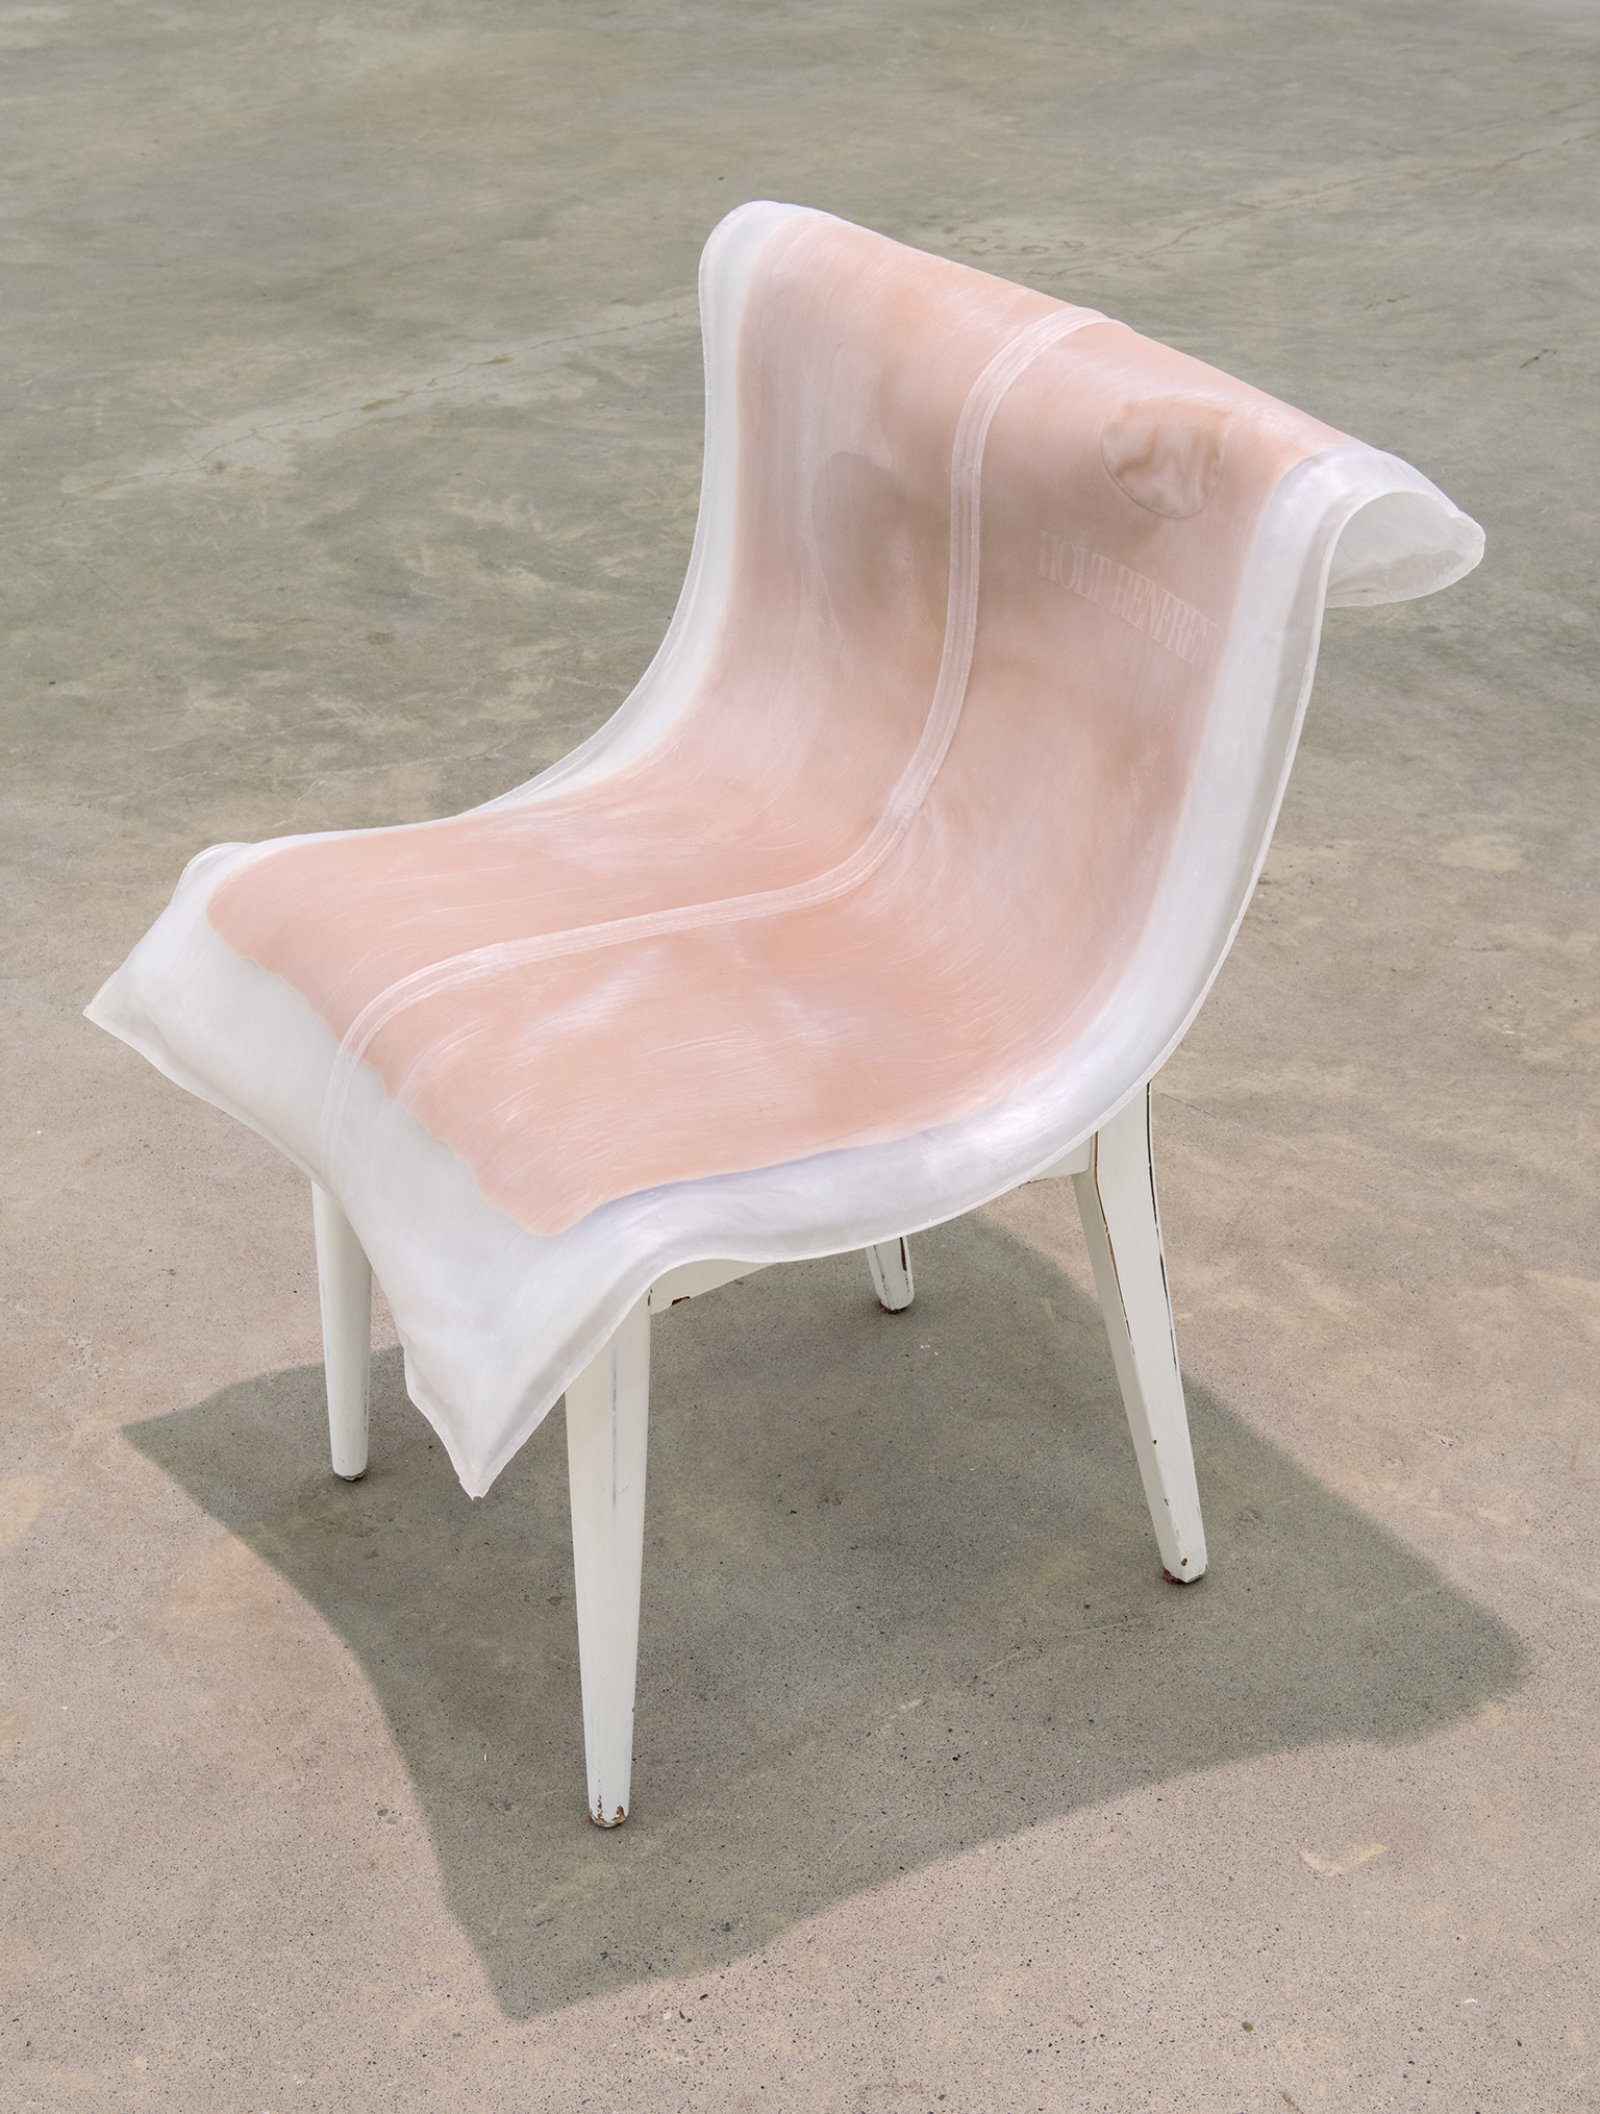 Liz Magor, Casual, 2012, platinum-cure silicone rubber, chair, 32 x 24 x 25 in. (80 x 61 x 64 cm)